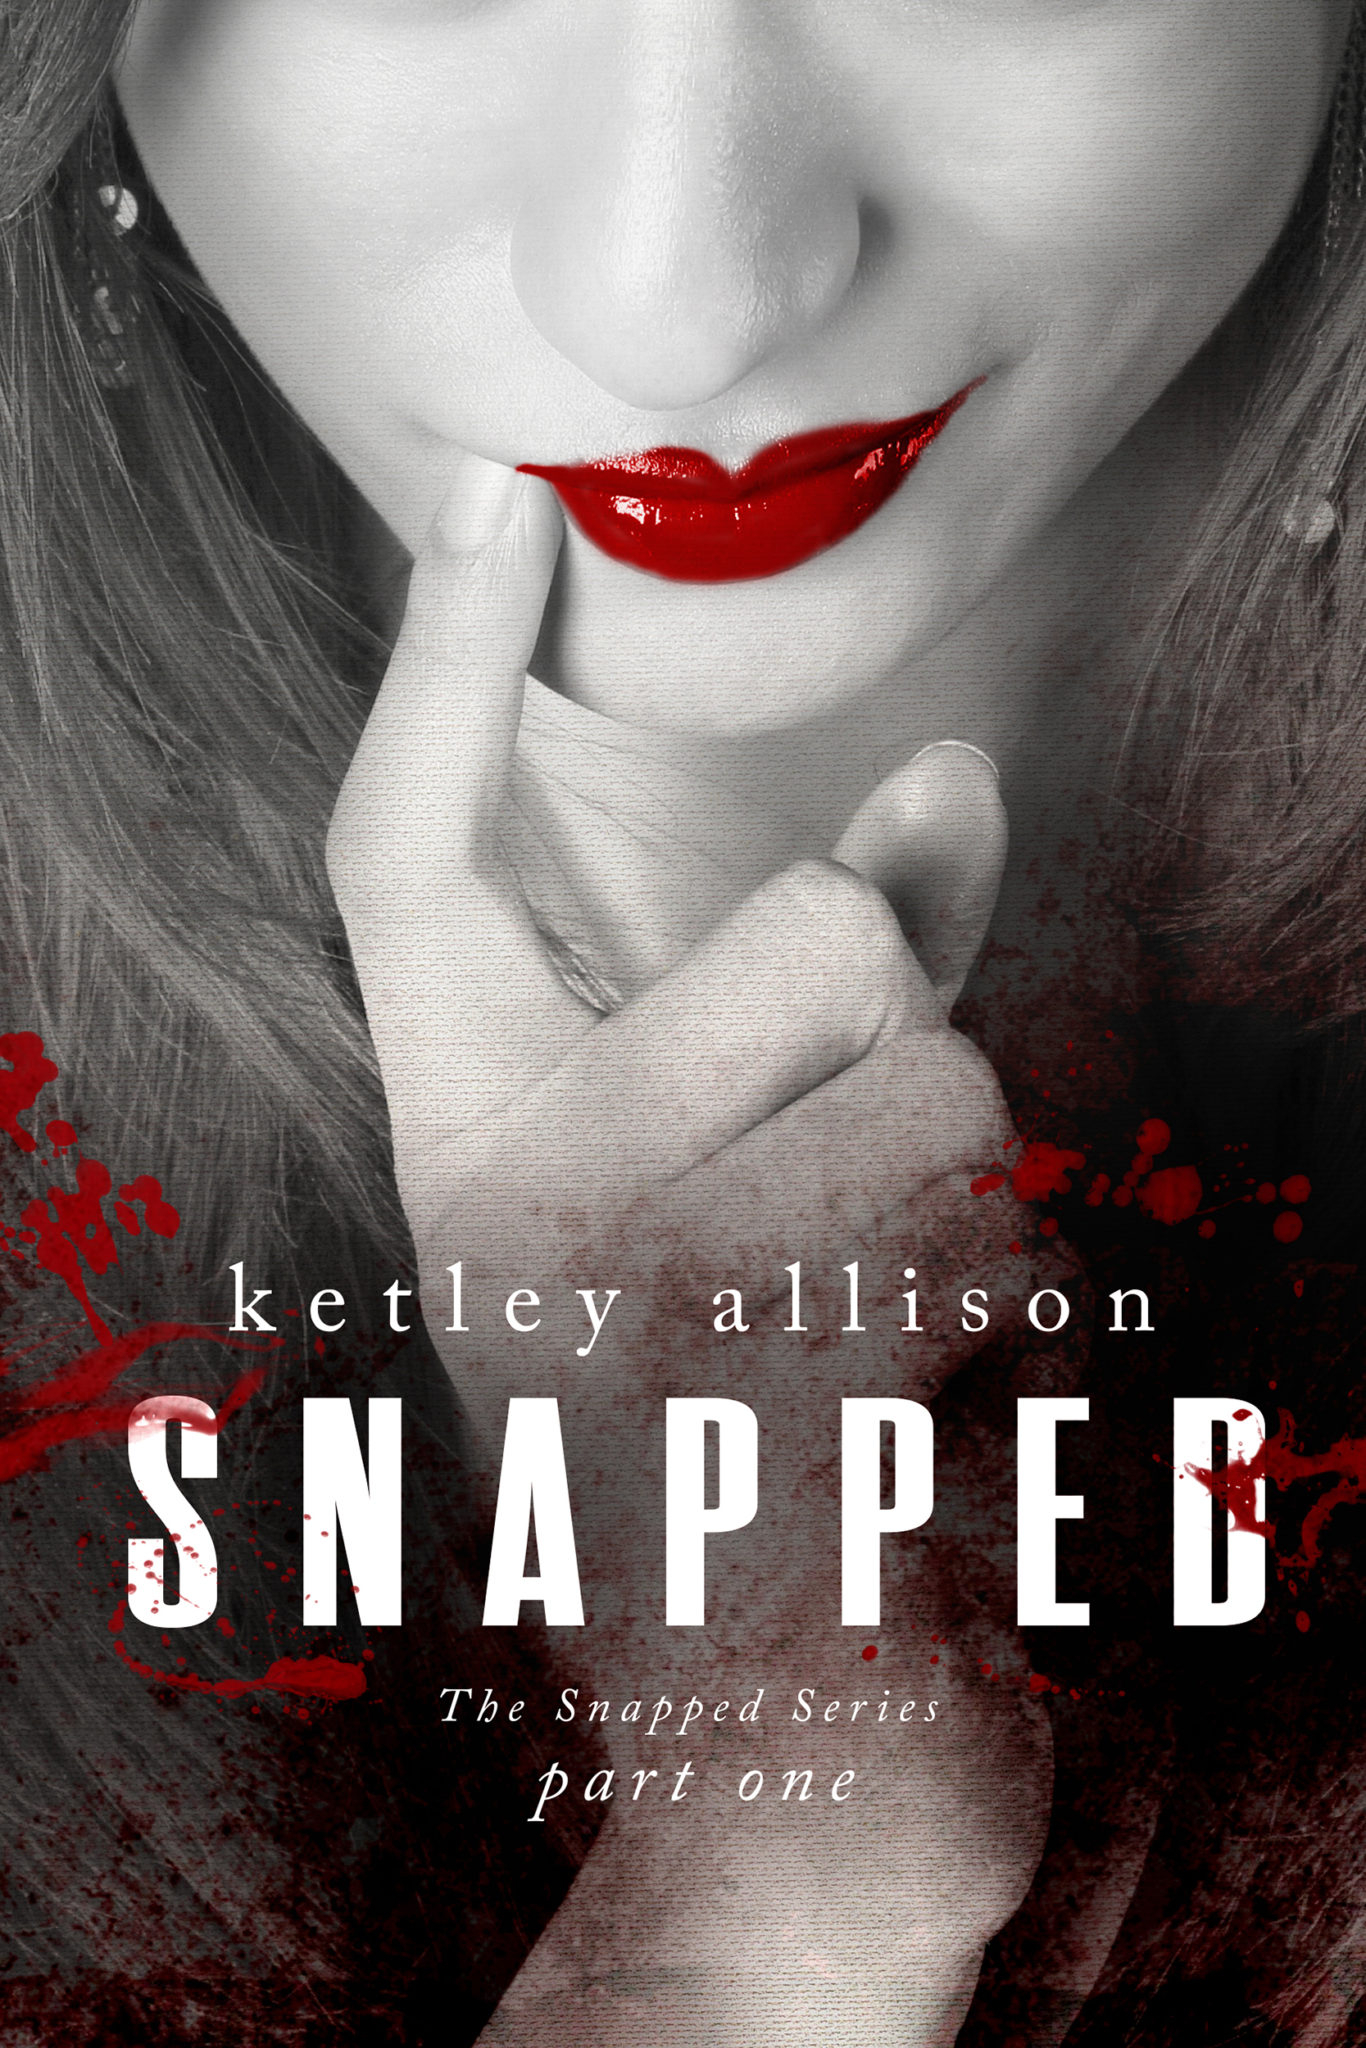 SNAPPED (The Snapped Novella Series, Part 1) by Ketley Allison